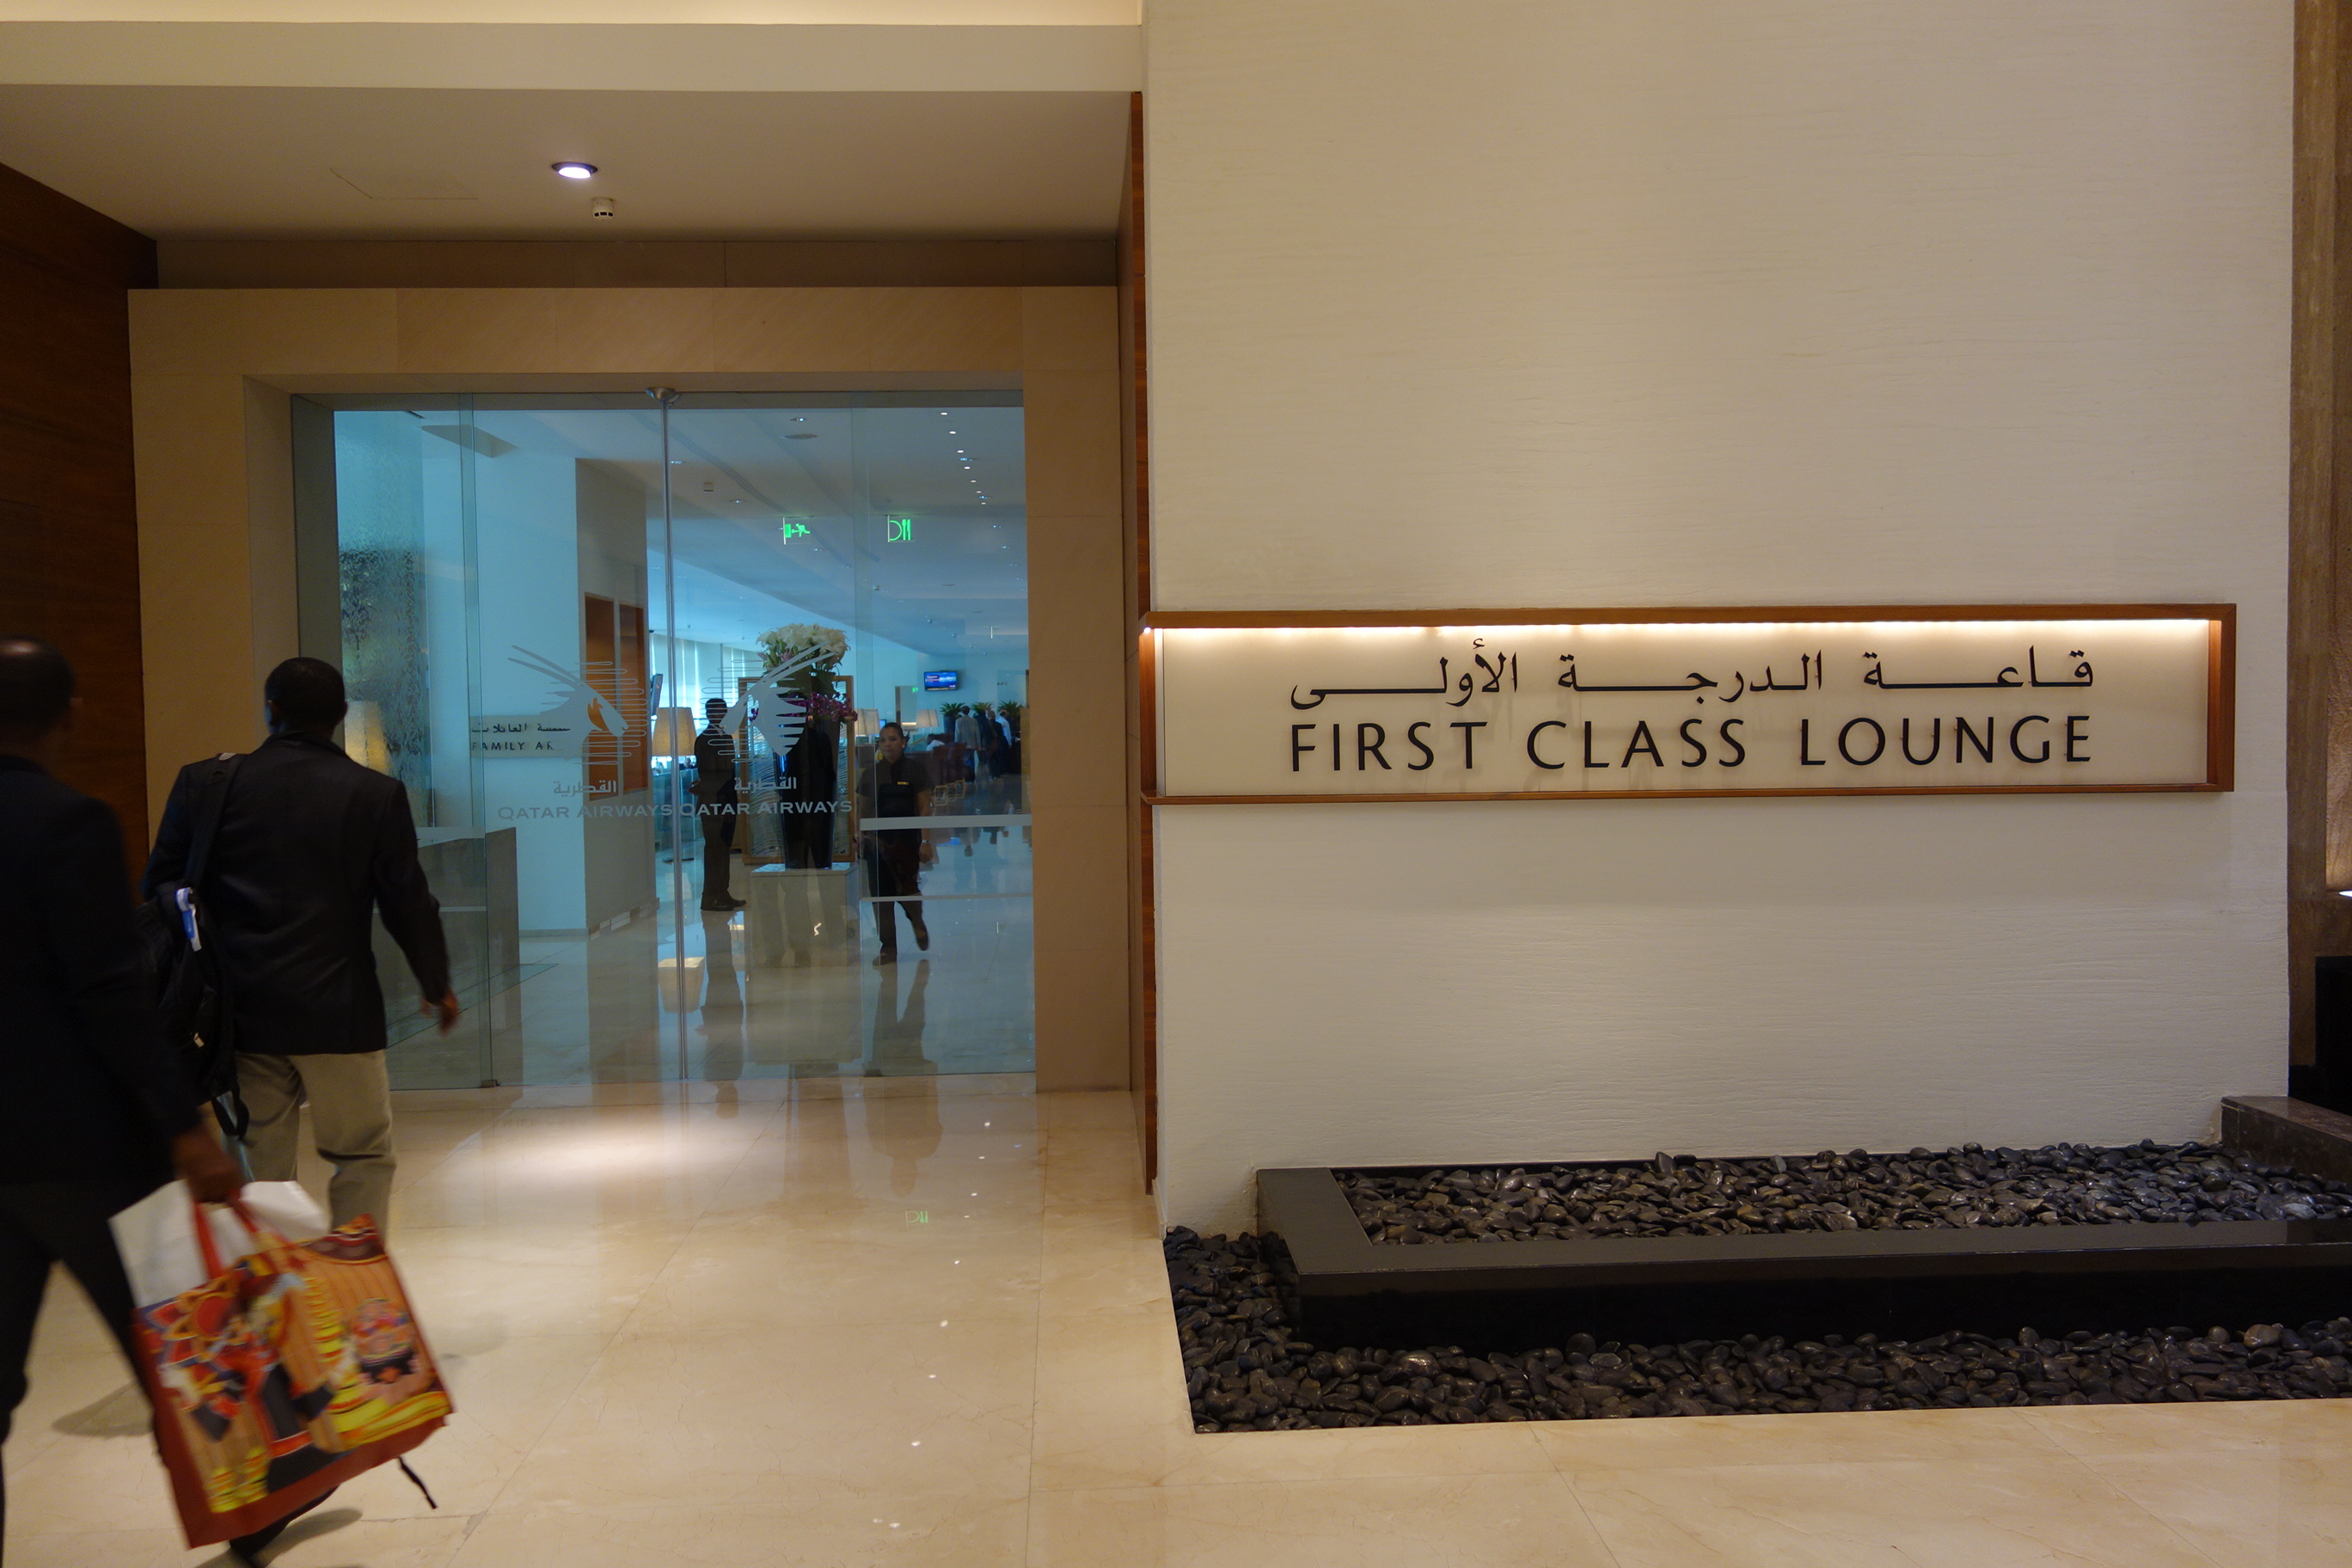 First Class Lounge entrance